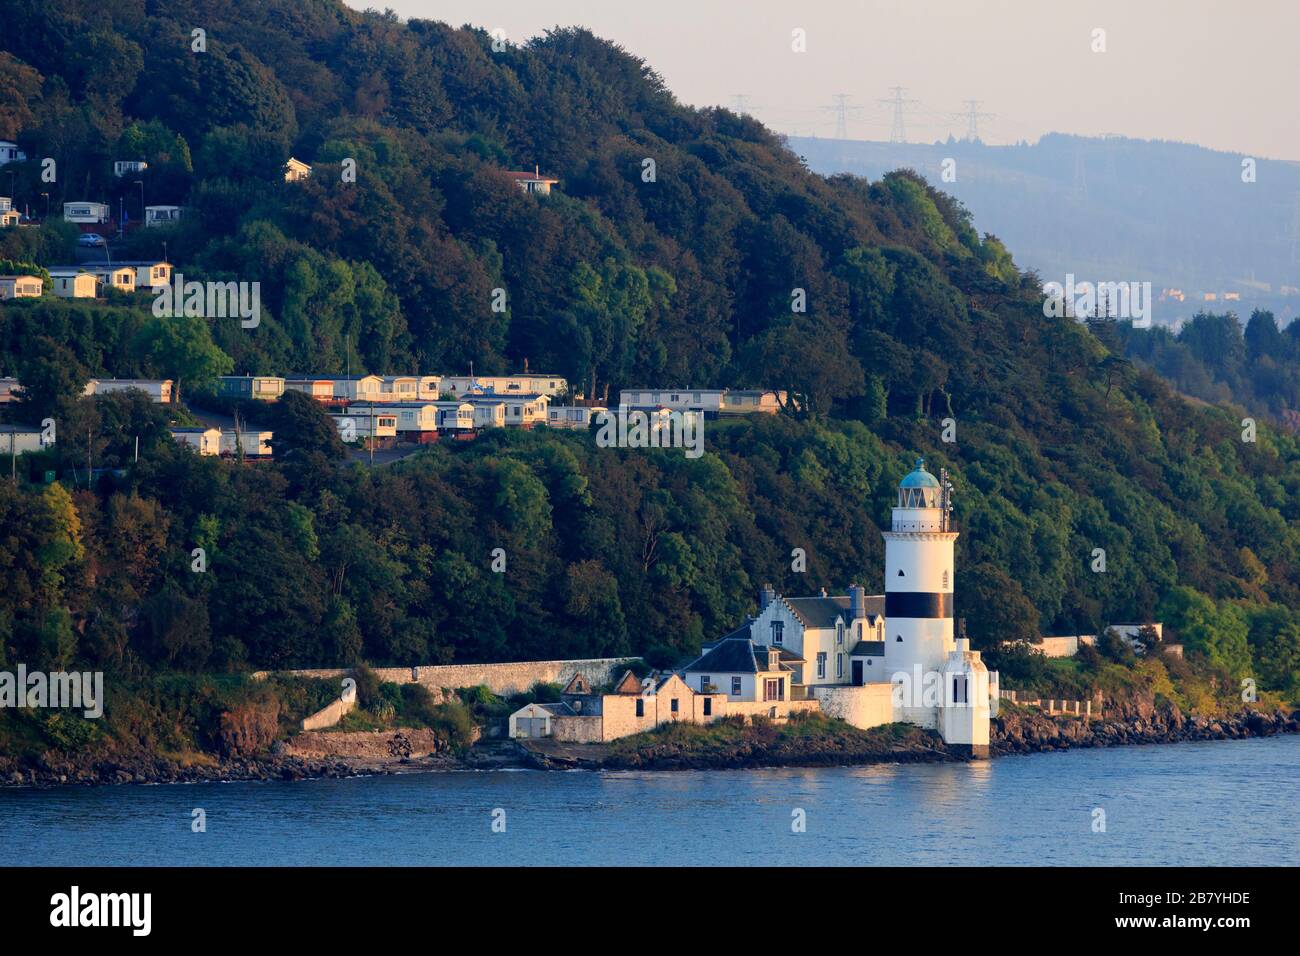 Cloch Lighthouse, Gourock Town, Firth of Clyde, Scotland, United Kingdom Stock Photo